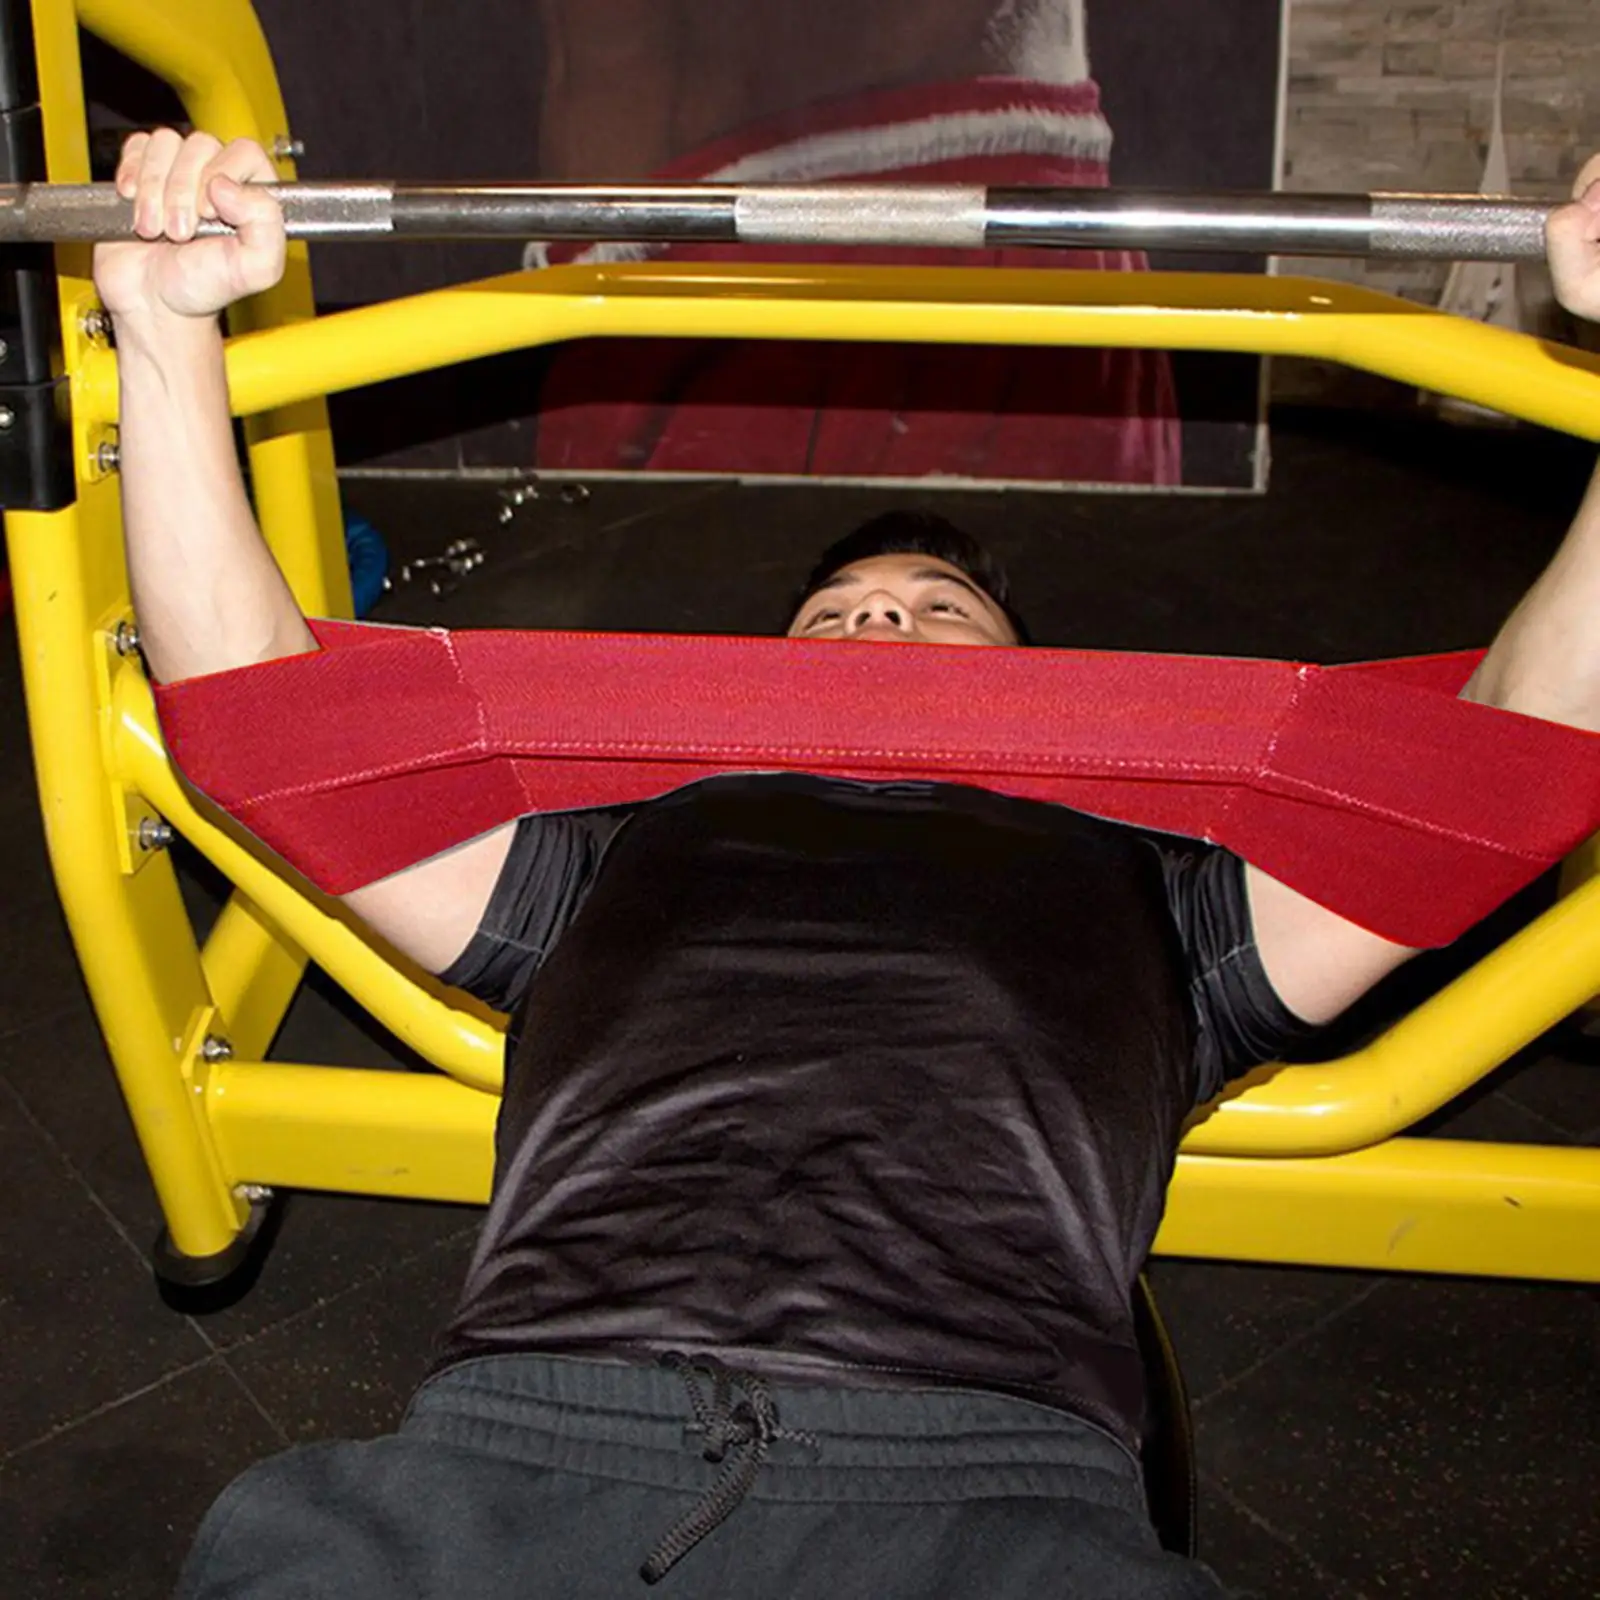 Bench Press , Elbow Shoulder , Assistance Bands  Resistance for Exercise Performance and Assistance